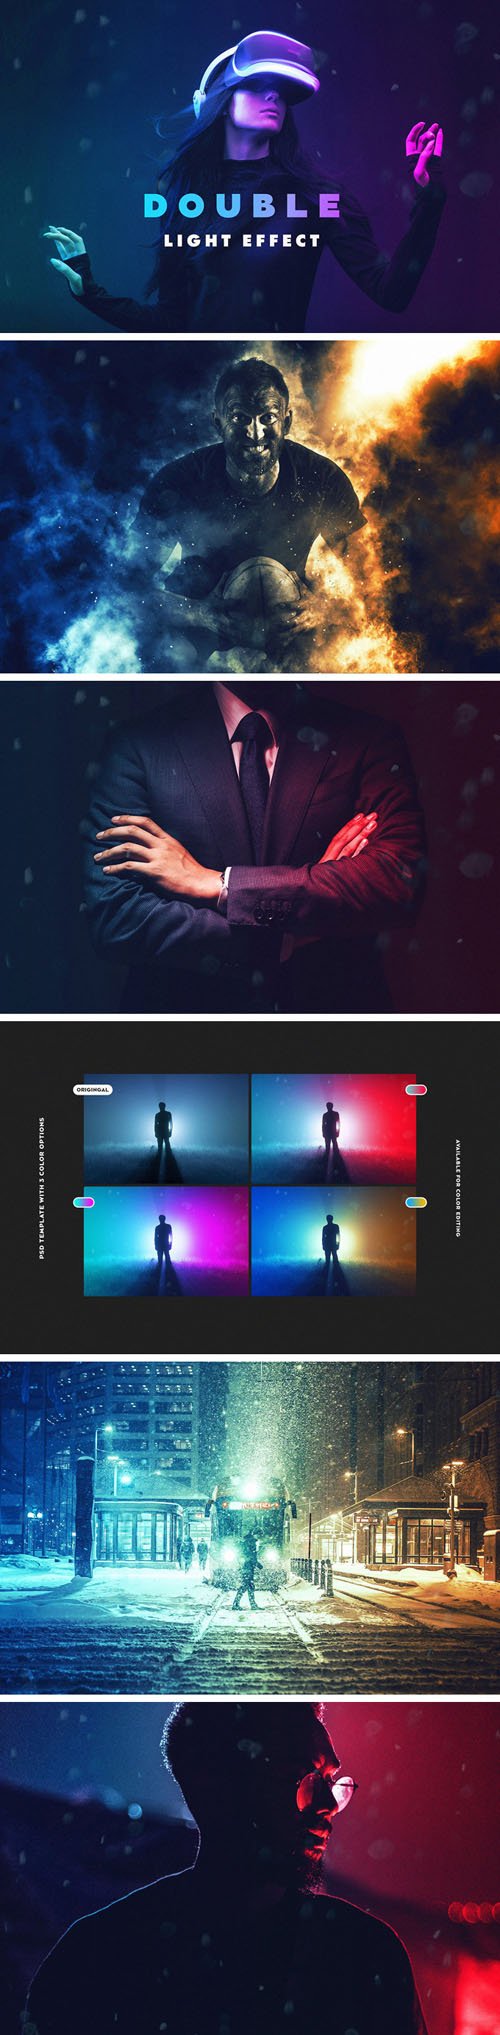 Double Light Photoshop Effect Pack